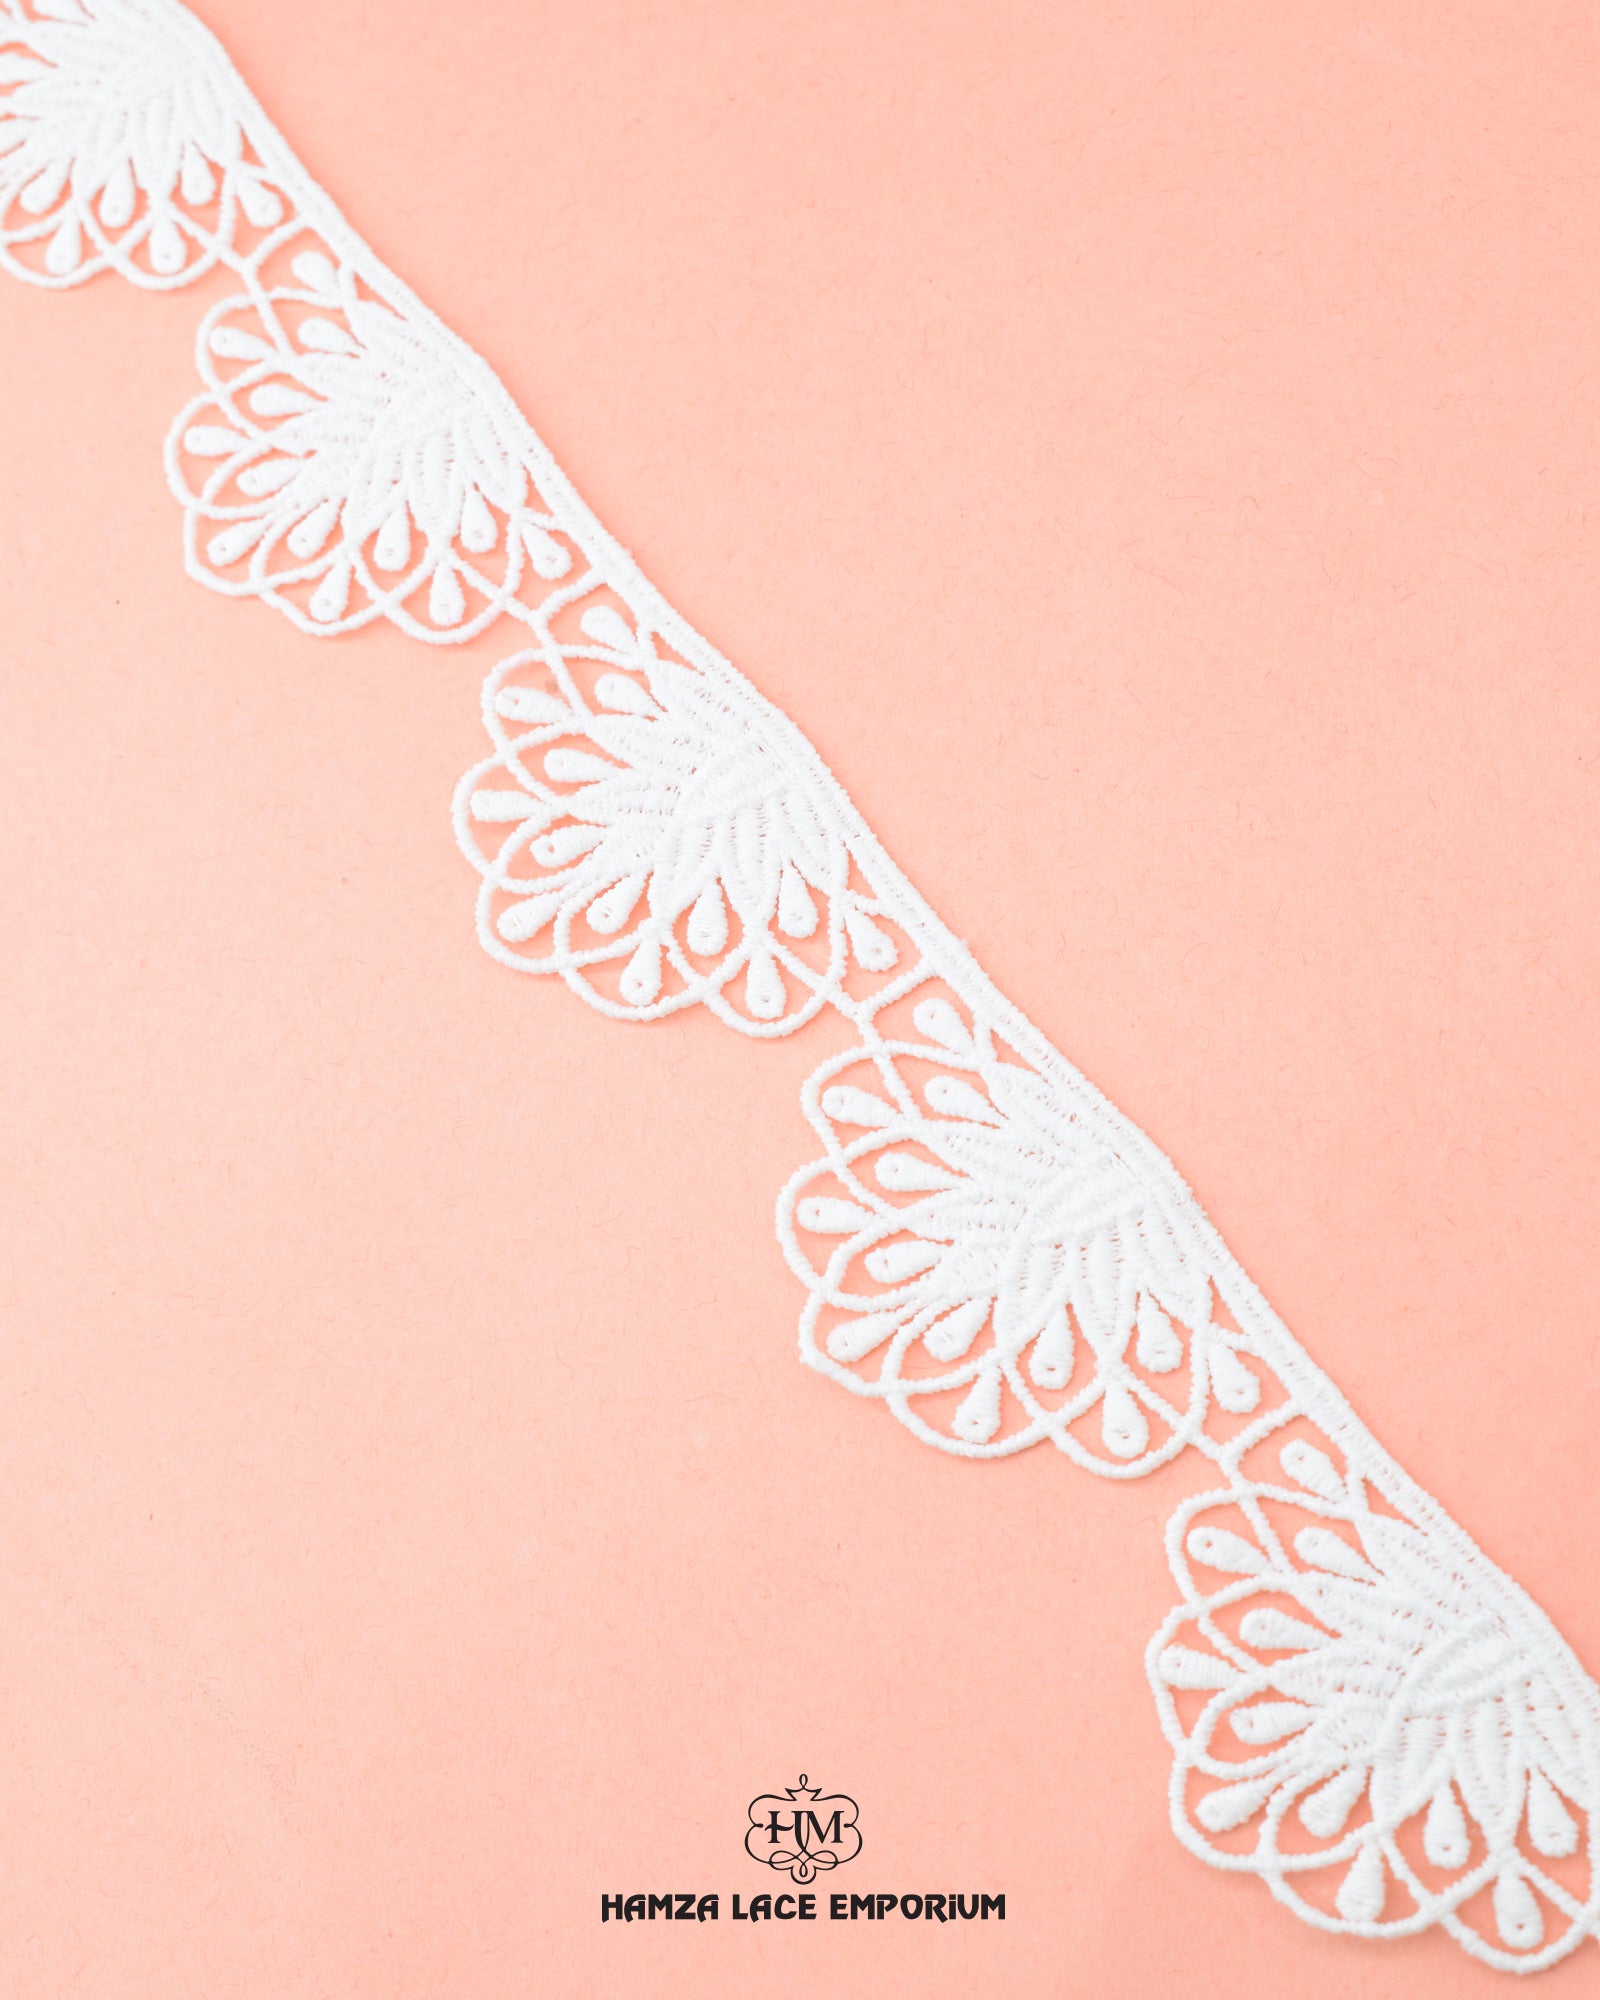 The white 'Edging Flower Lace 2018' on a pink background with the ' hamza lace' sign and logo